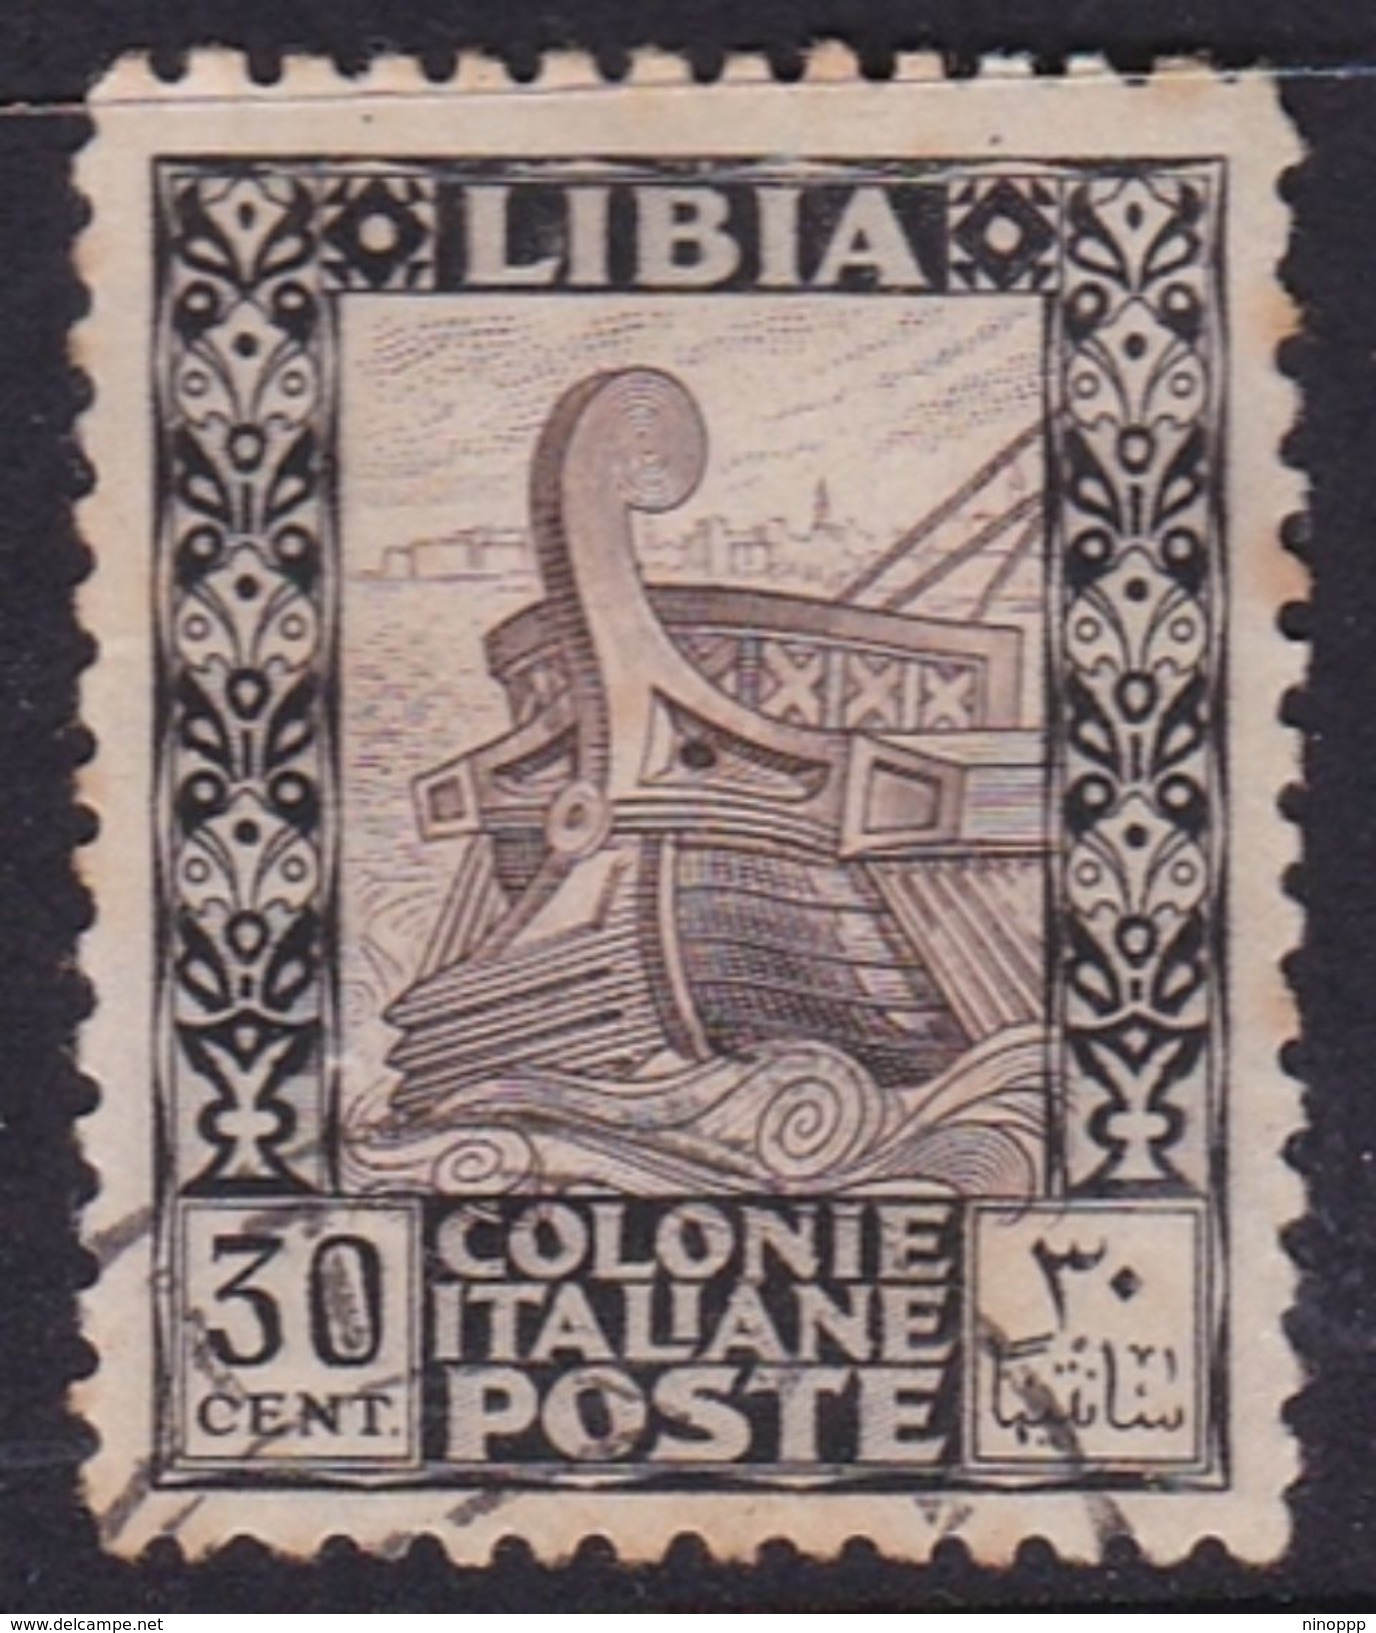 Italy-Colonies And Territories-Libya S 63 1926-30 ,Ancient Galley,perf 11,30c,used - Libya